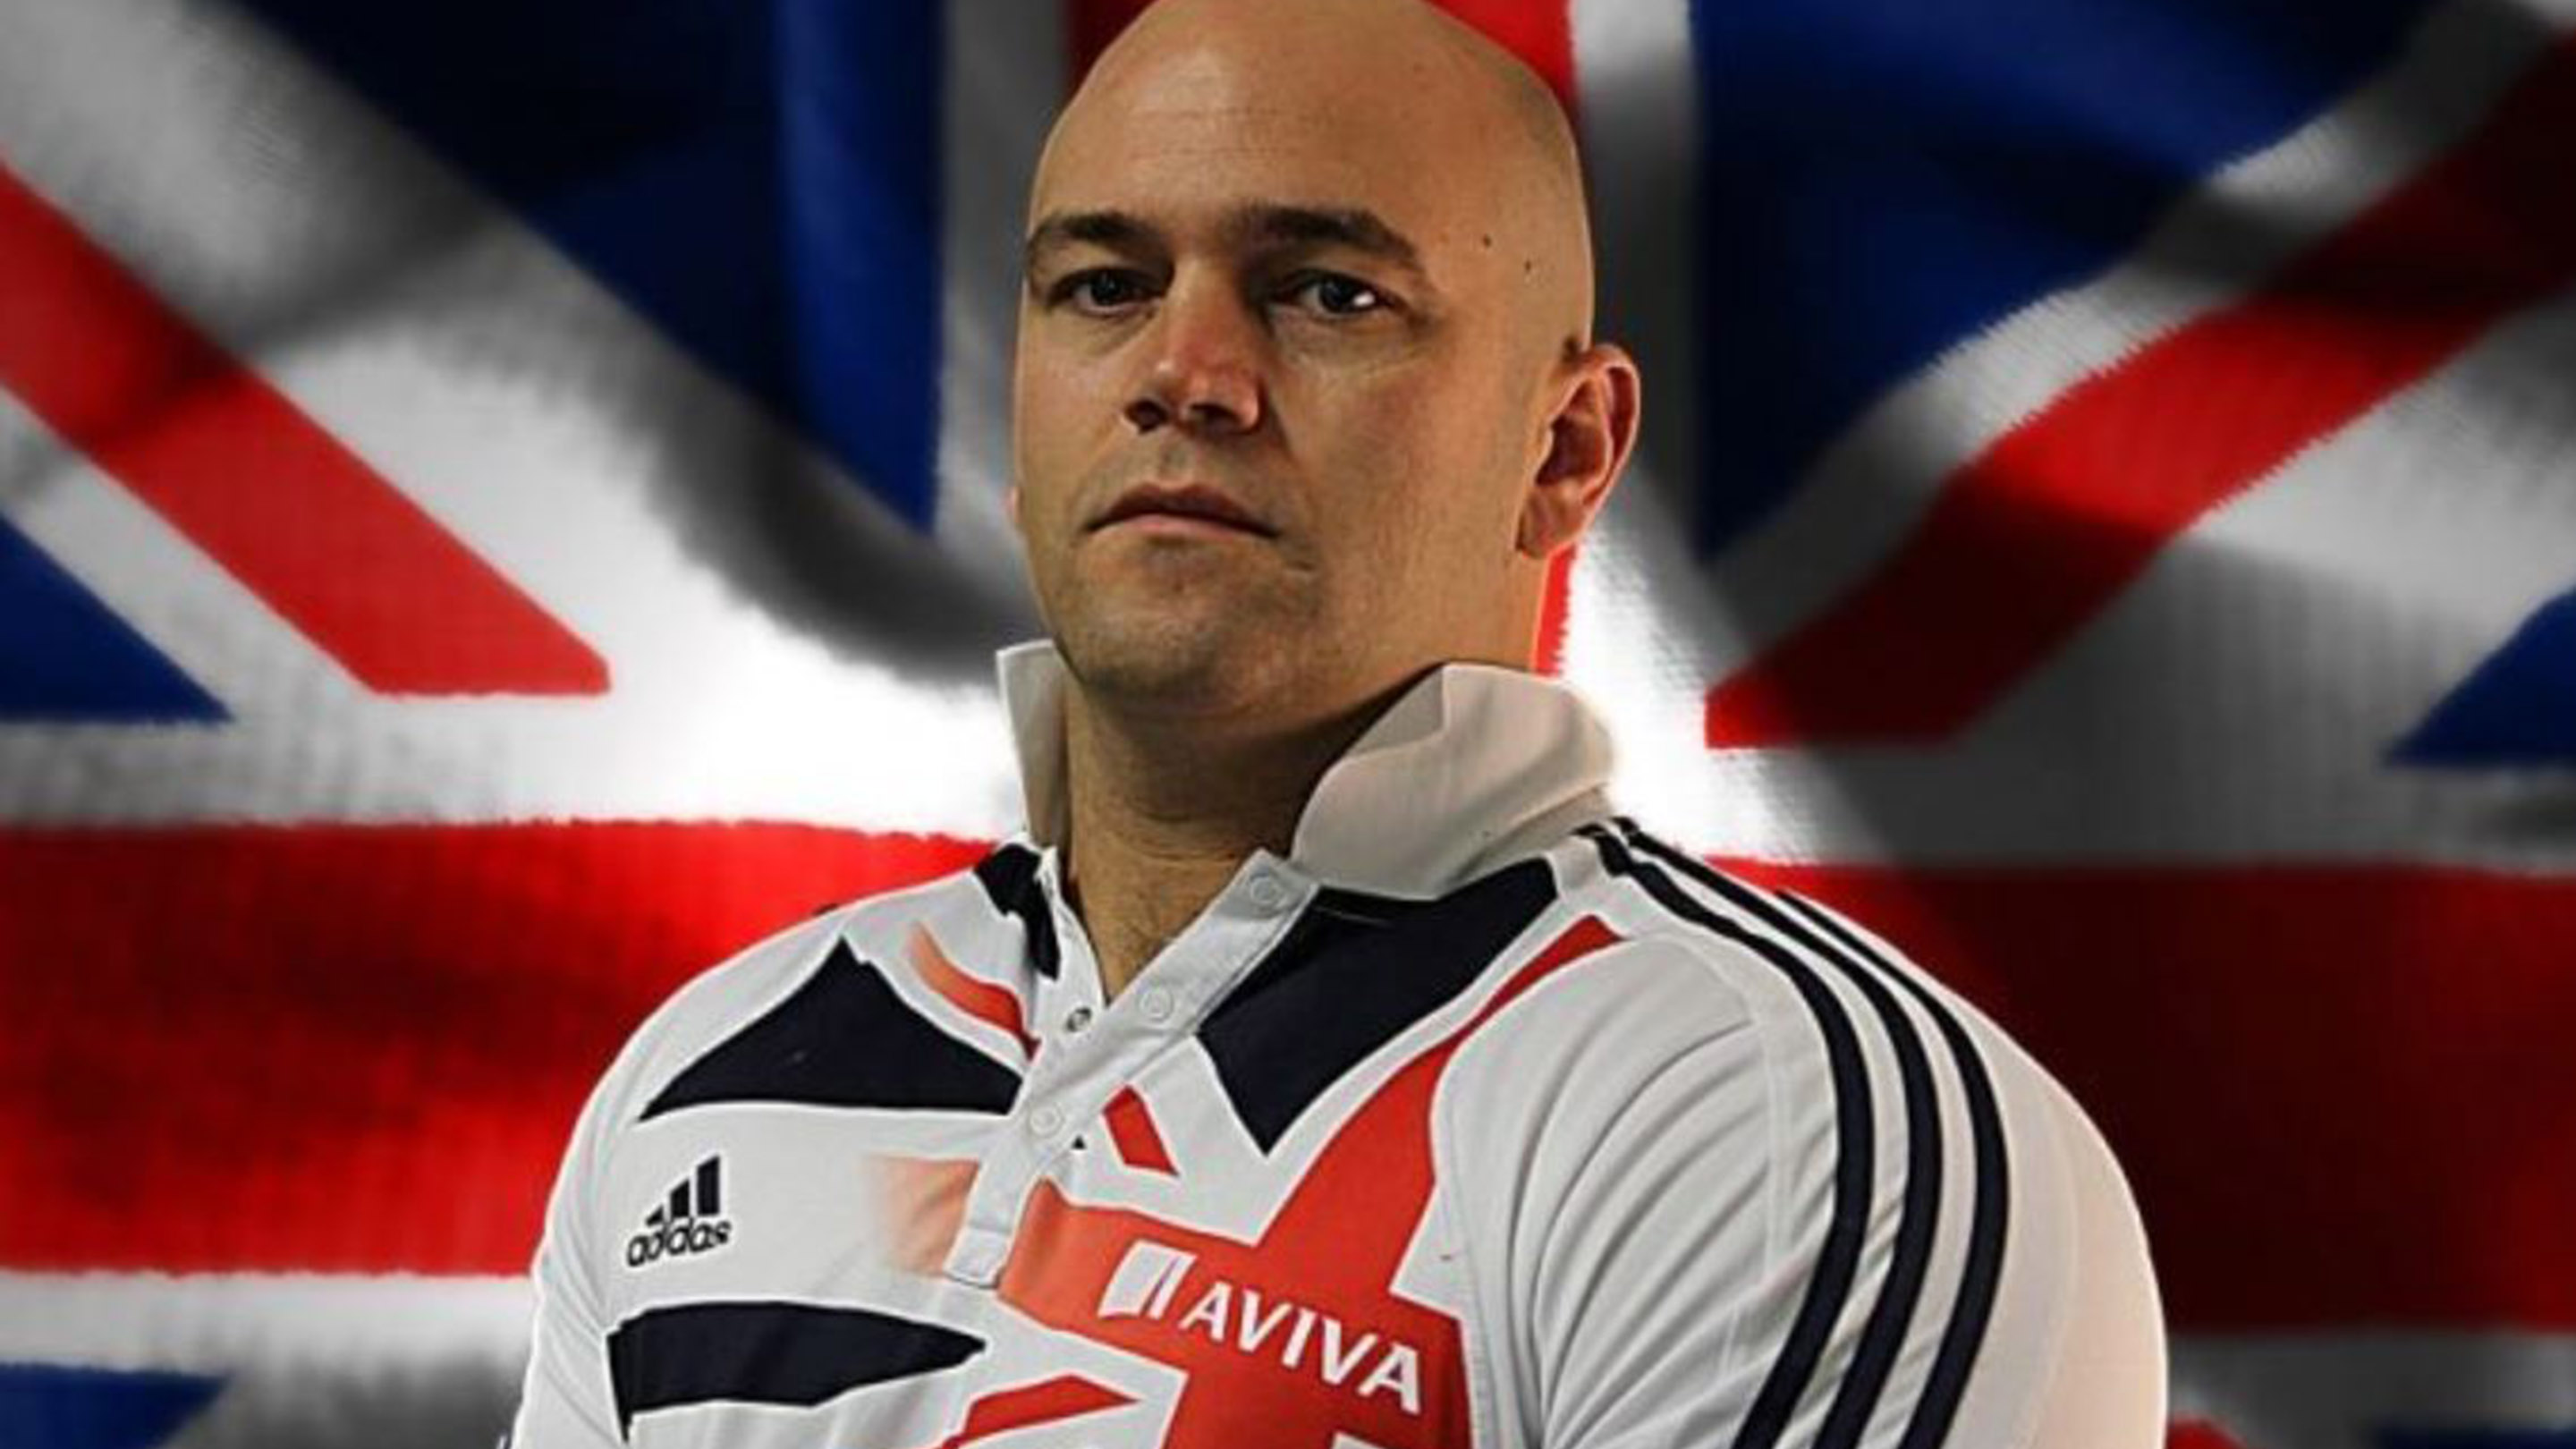 Image of Danny Nobbs wearing sponsored athletics top in front of a union flag